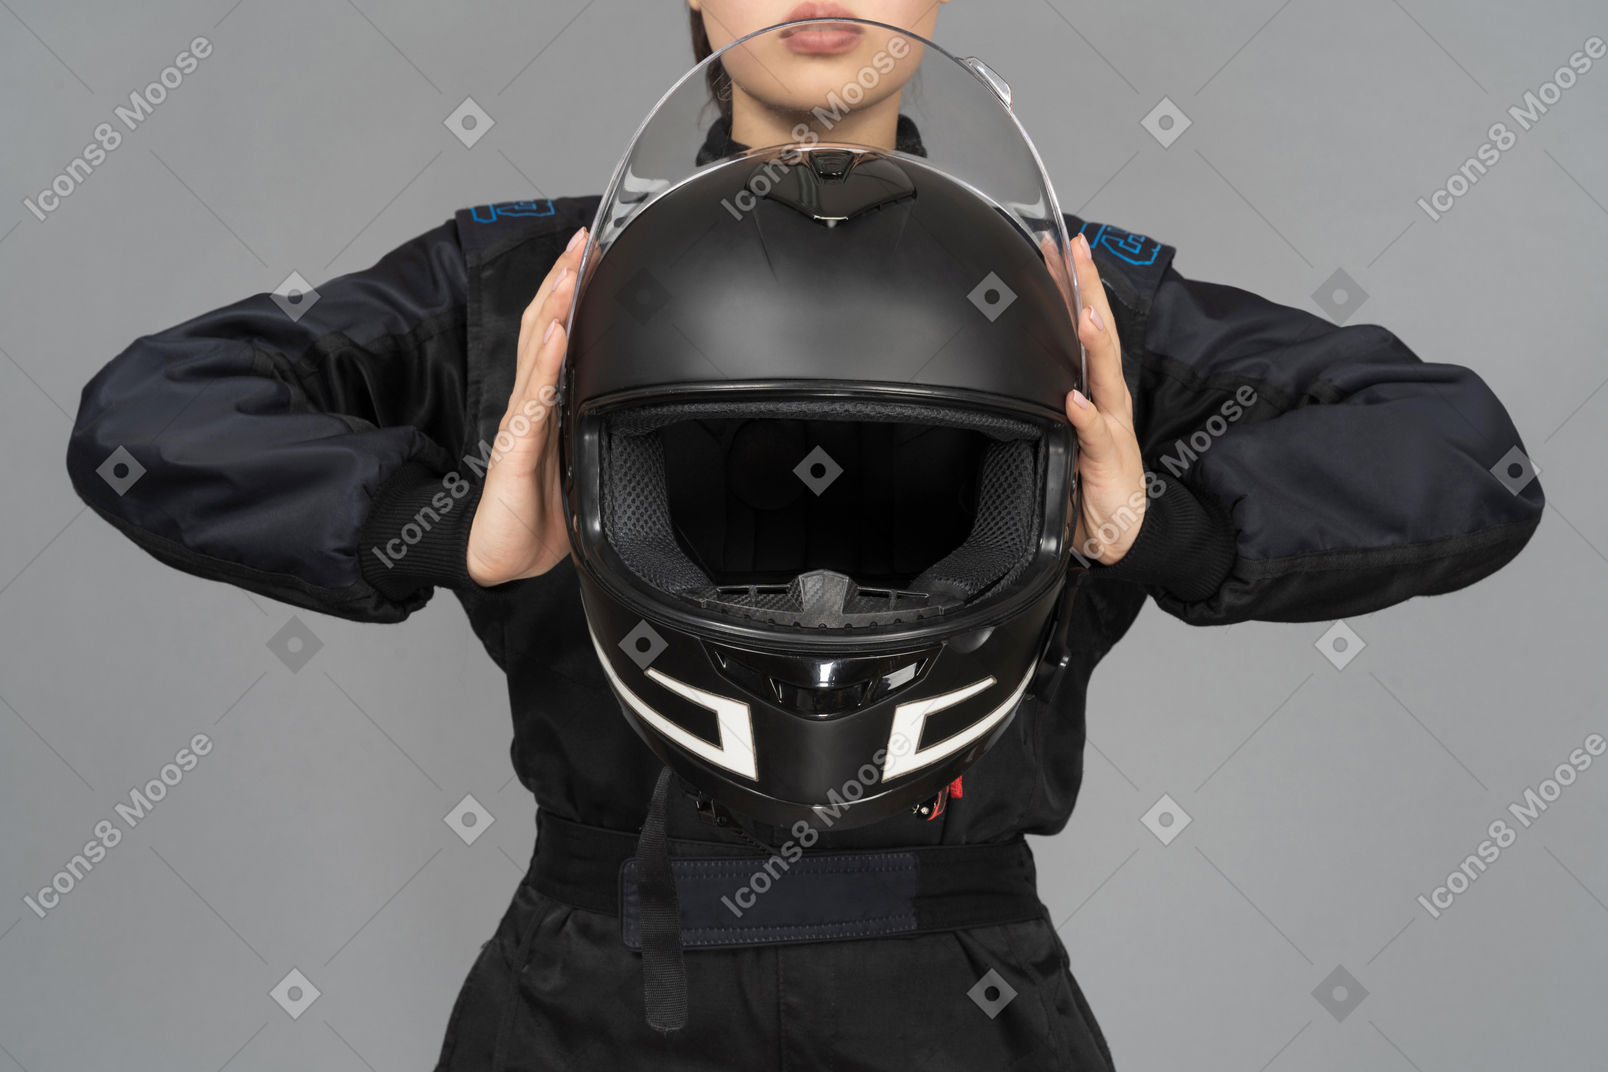 A woman holding a black helmet at a chest level